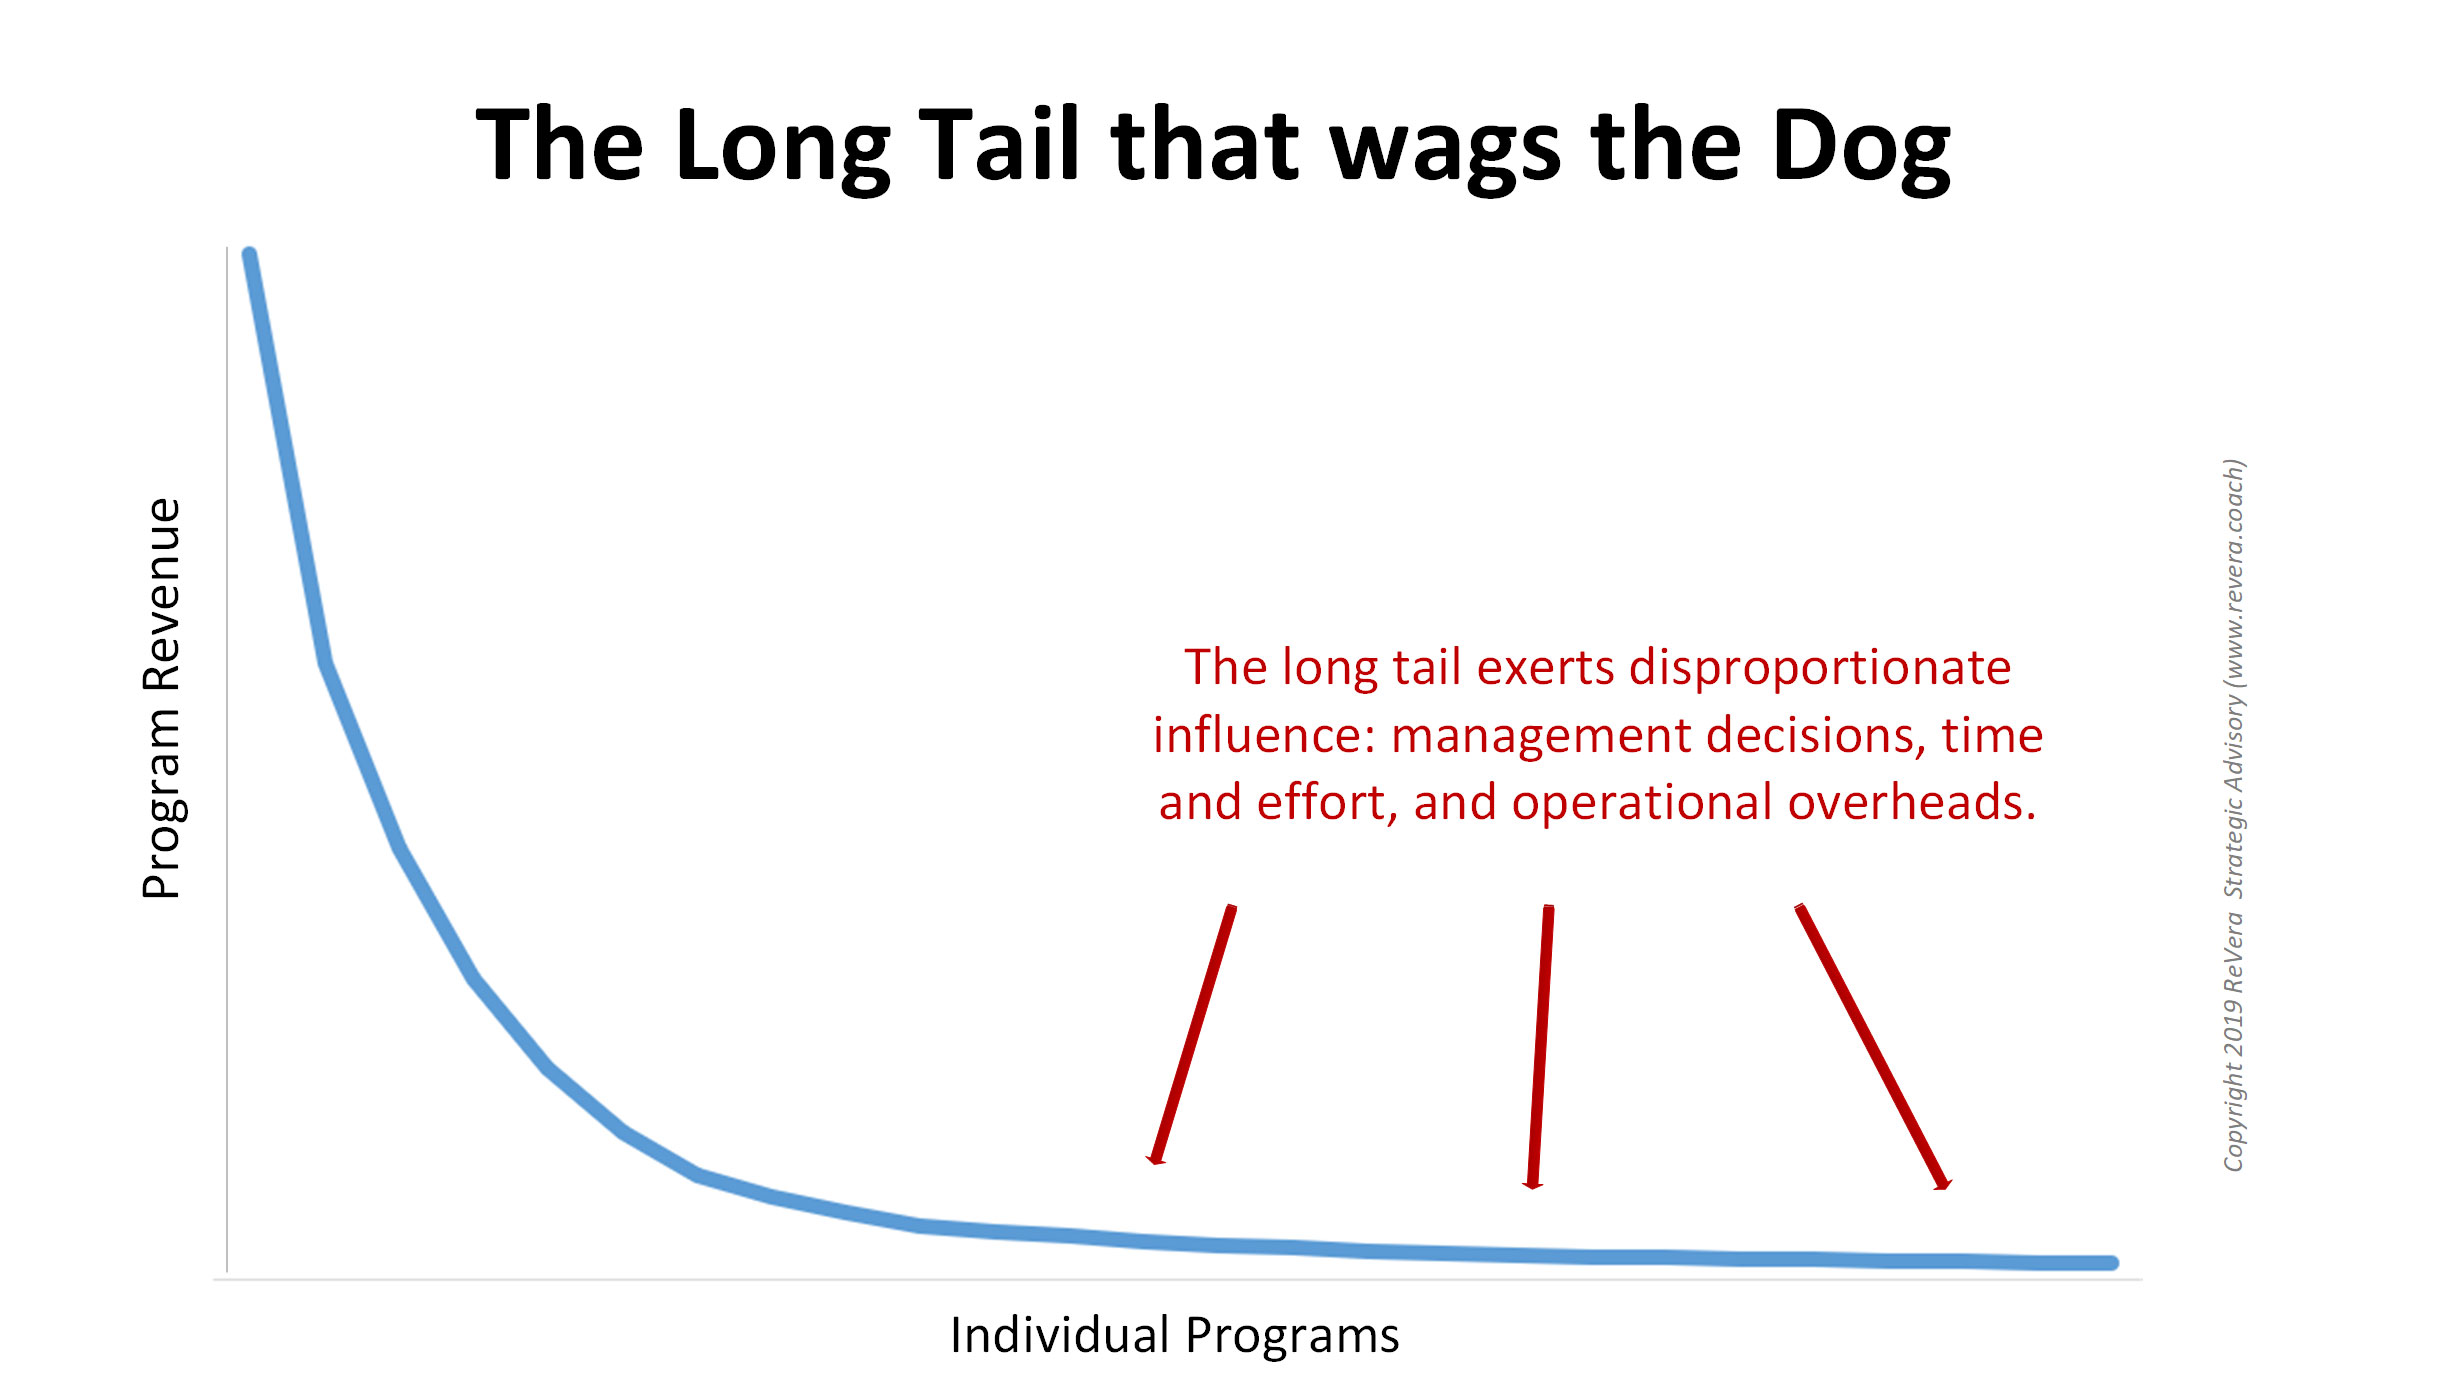 The long tail that wags the dog curve